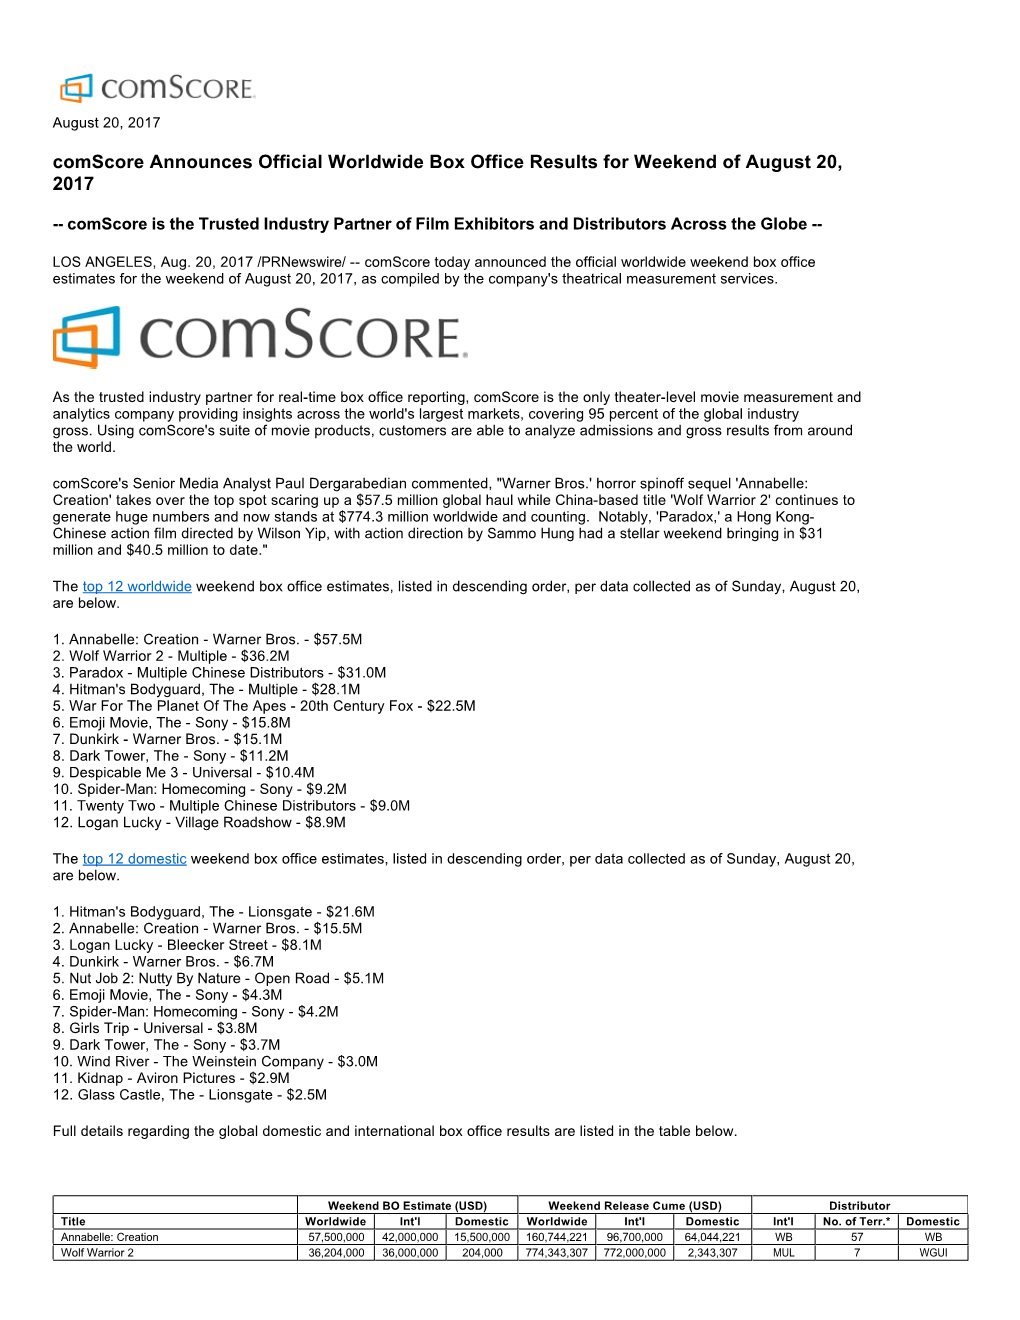 Comscore Announces Official Worldwide Box Office Results for Weekend of August 20, 2017